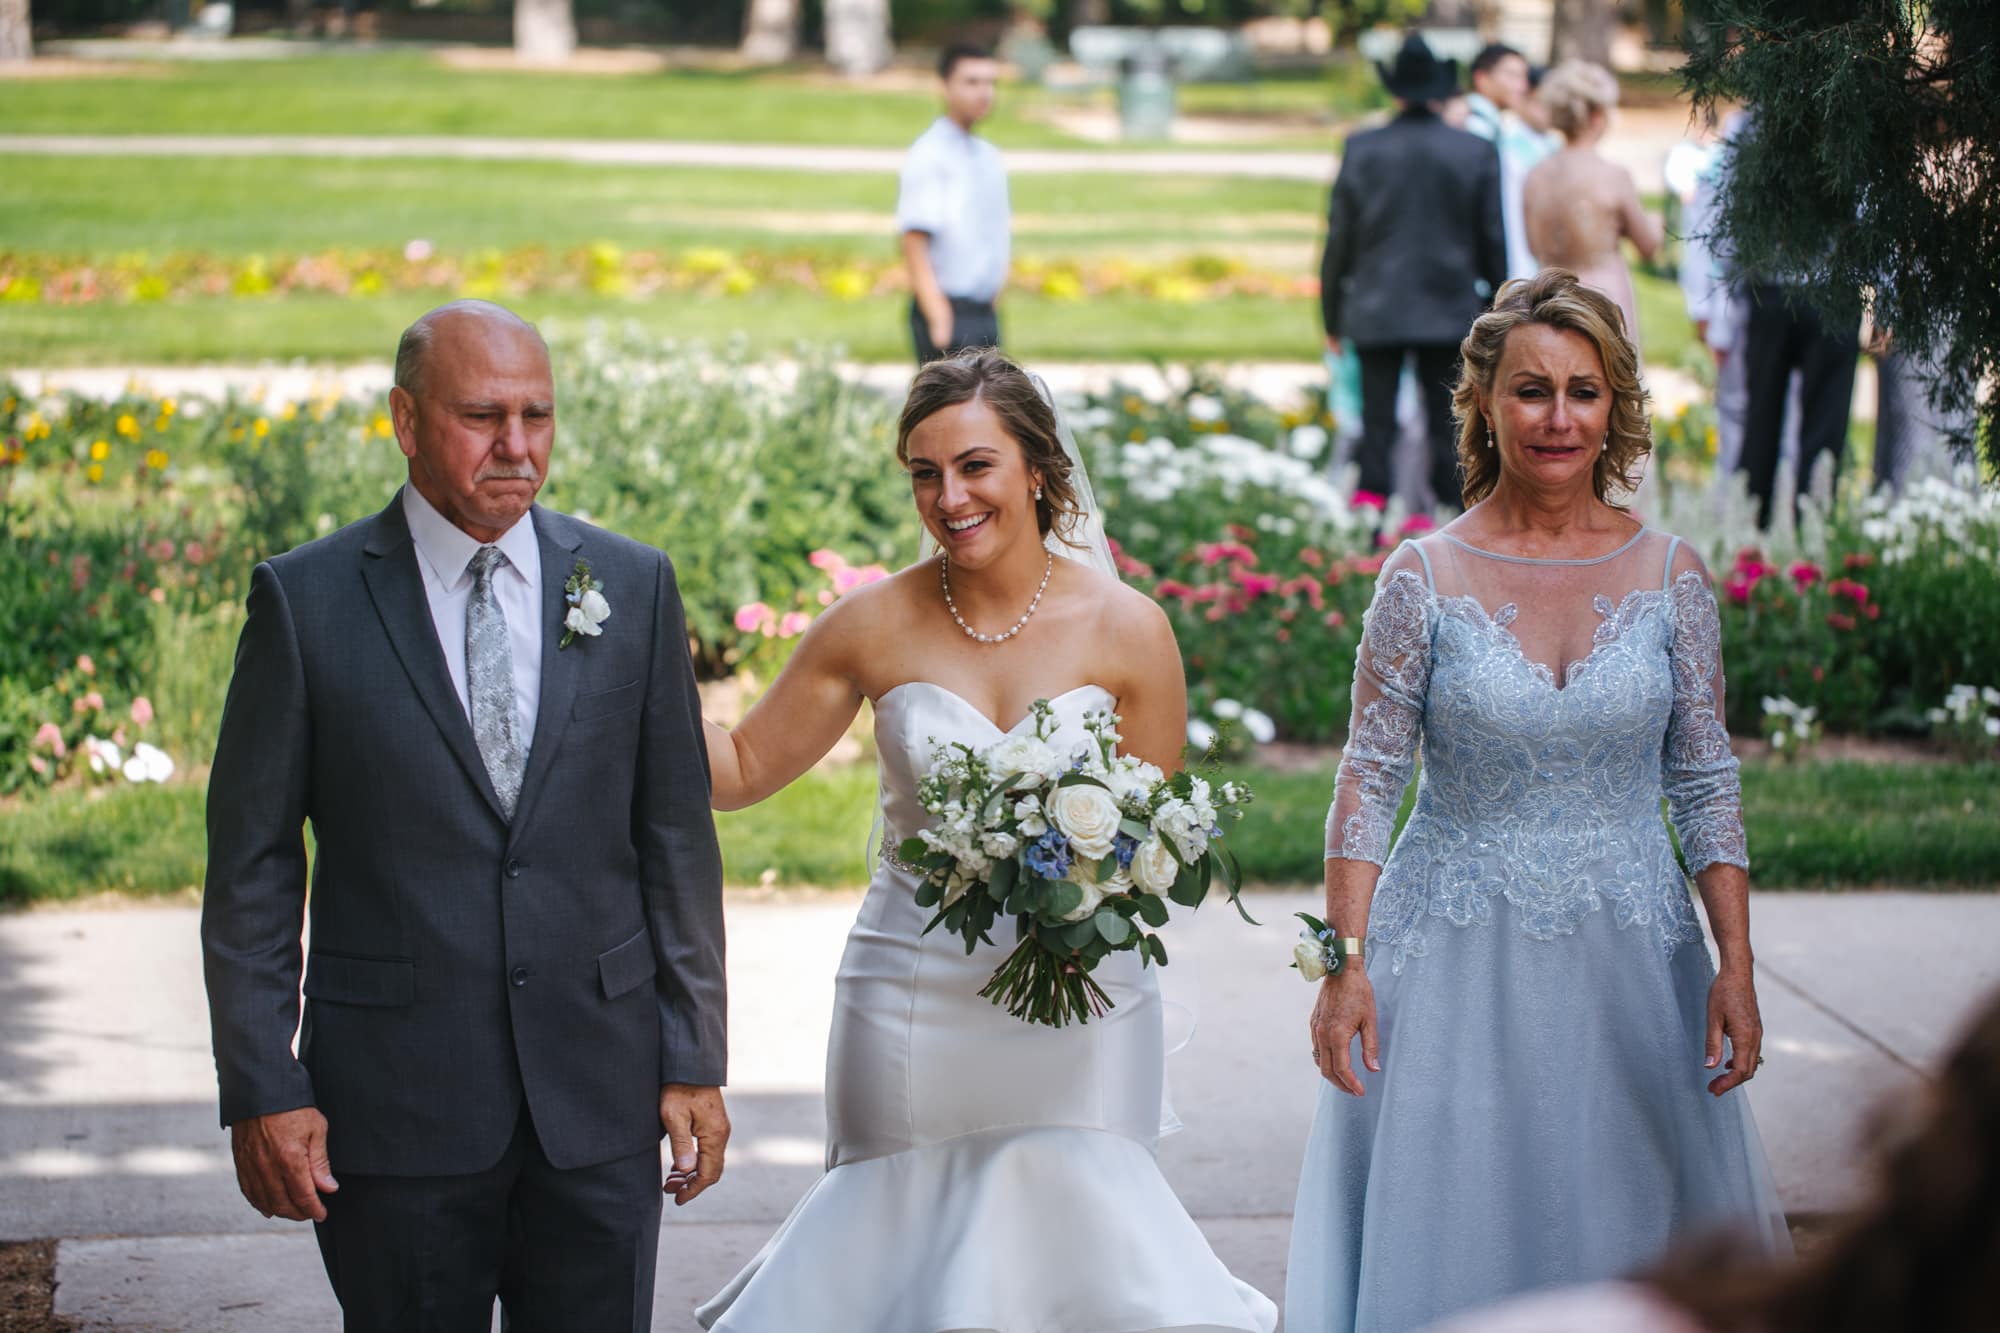 bride with parents, bride with dad before walking down aisle, dad crying with bride, mom crying with bride, bride with parents on wedding day, Cheeseman Park wedding, outdoor wedding ceremony, white wedding flowers, light blue mother of bride dress